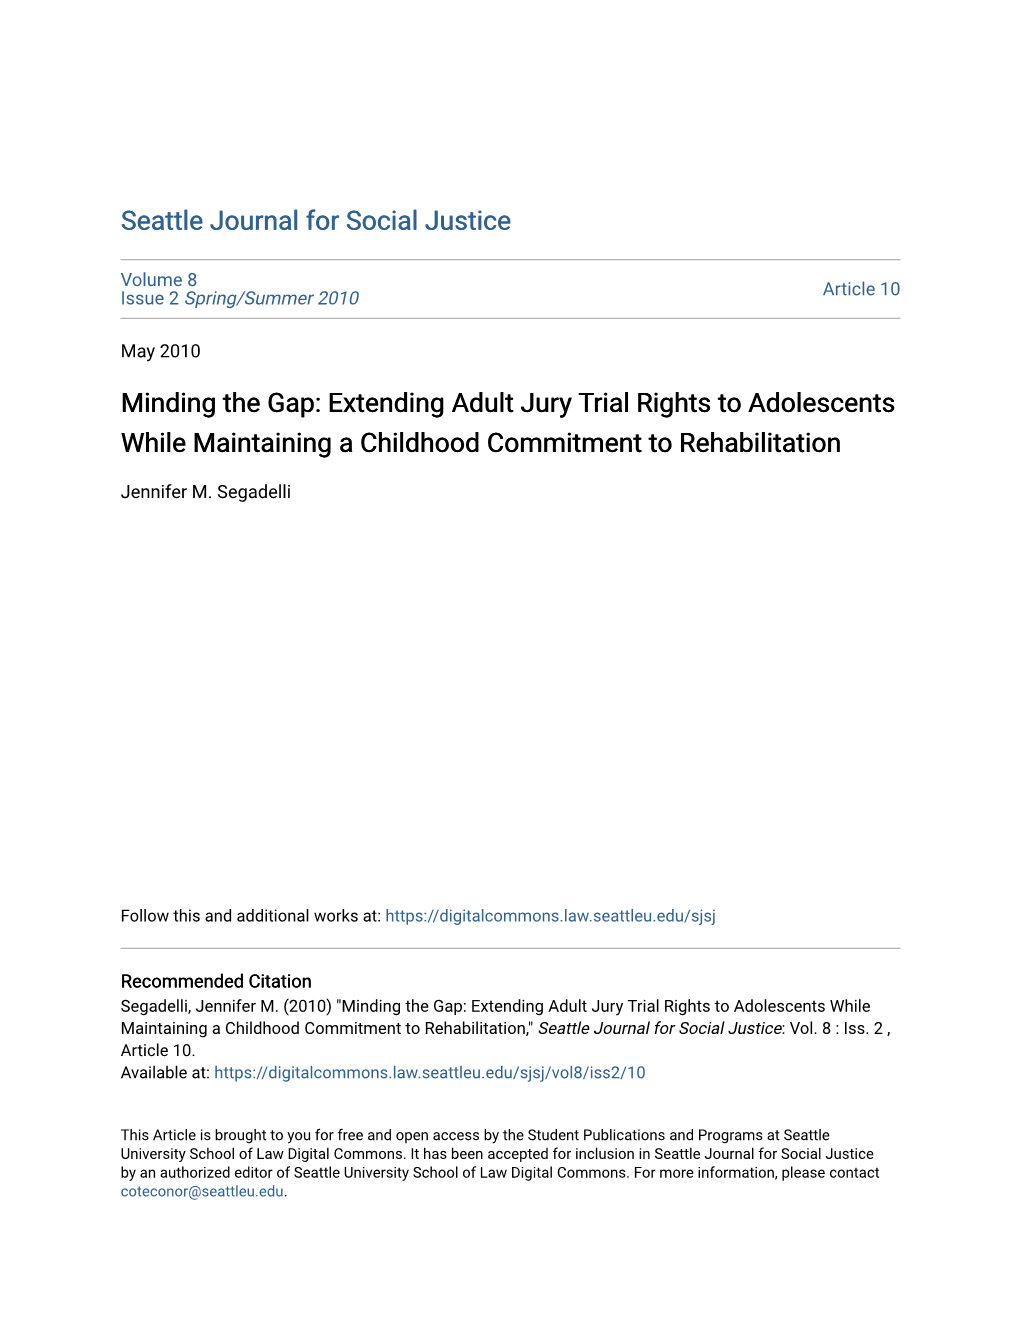 Extending Adult Jury Trial Rights to Adolescents While Maintaining a Childhood Commitment to Rehabilitation